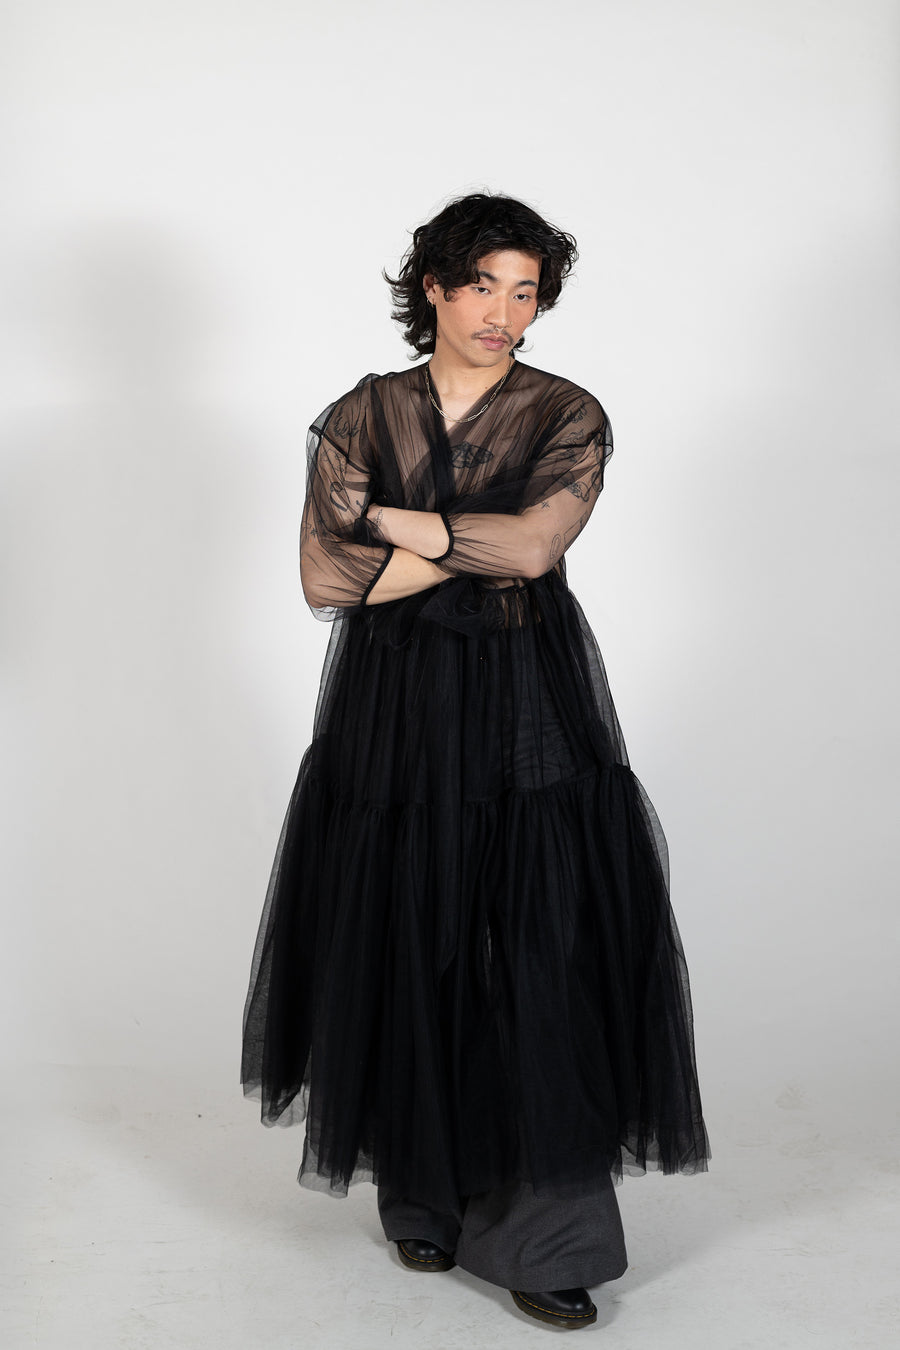 Reverie Tulle dress worn over Acme Trousers by Australian brand House of Campbell.